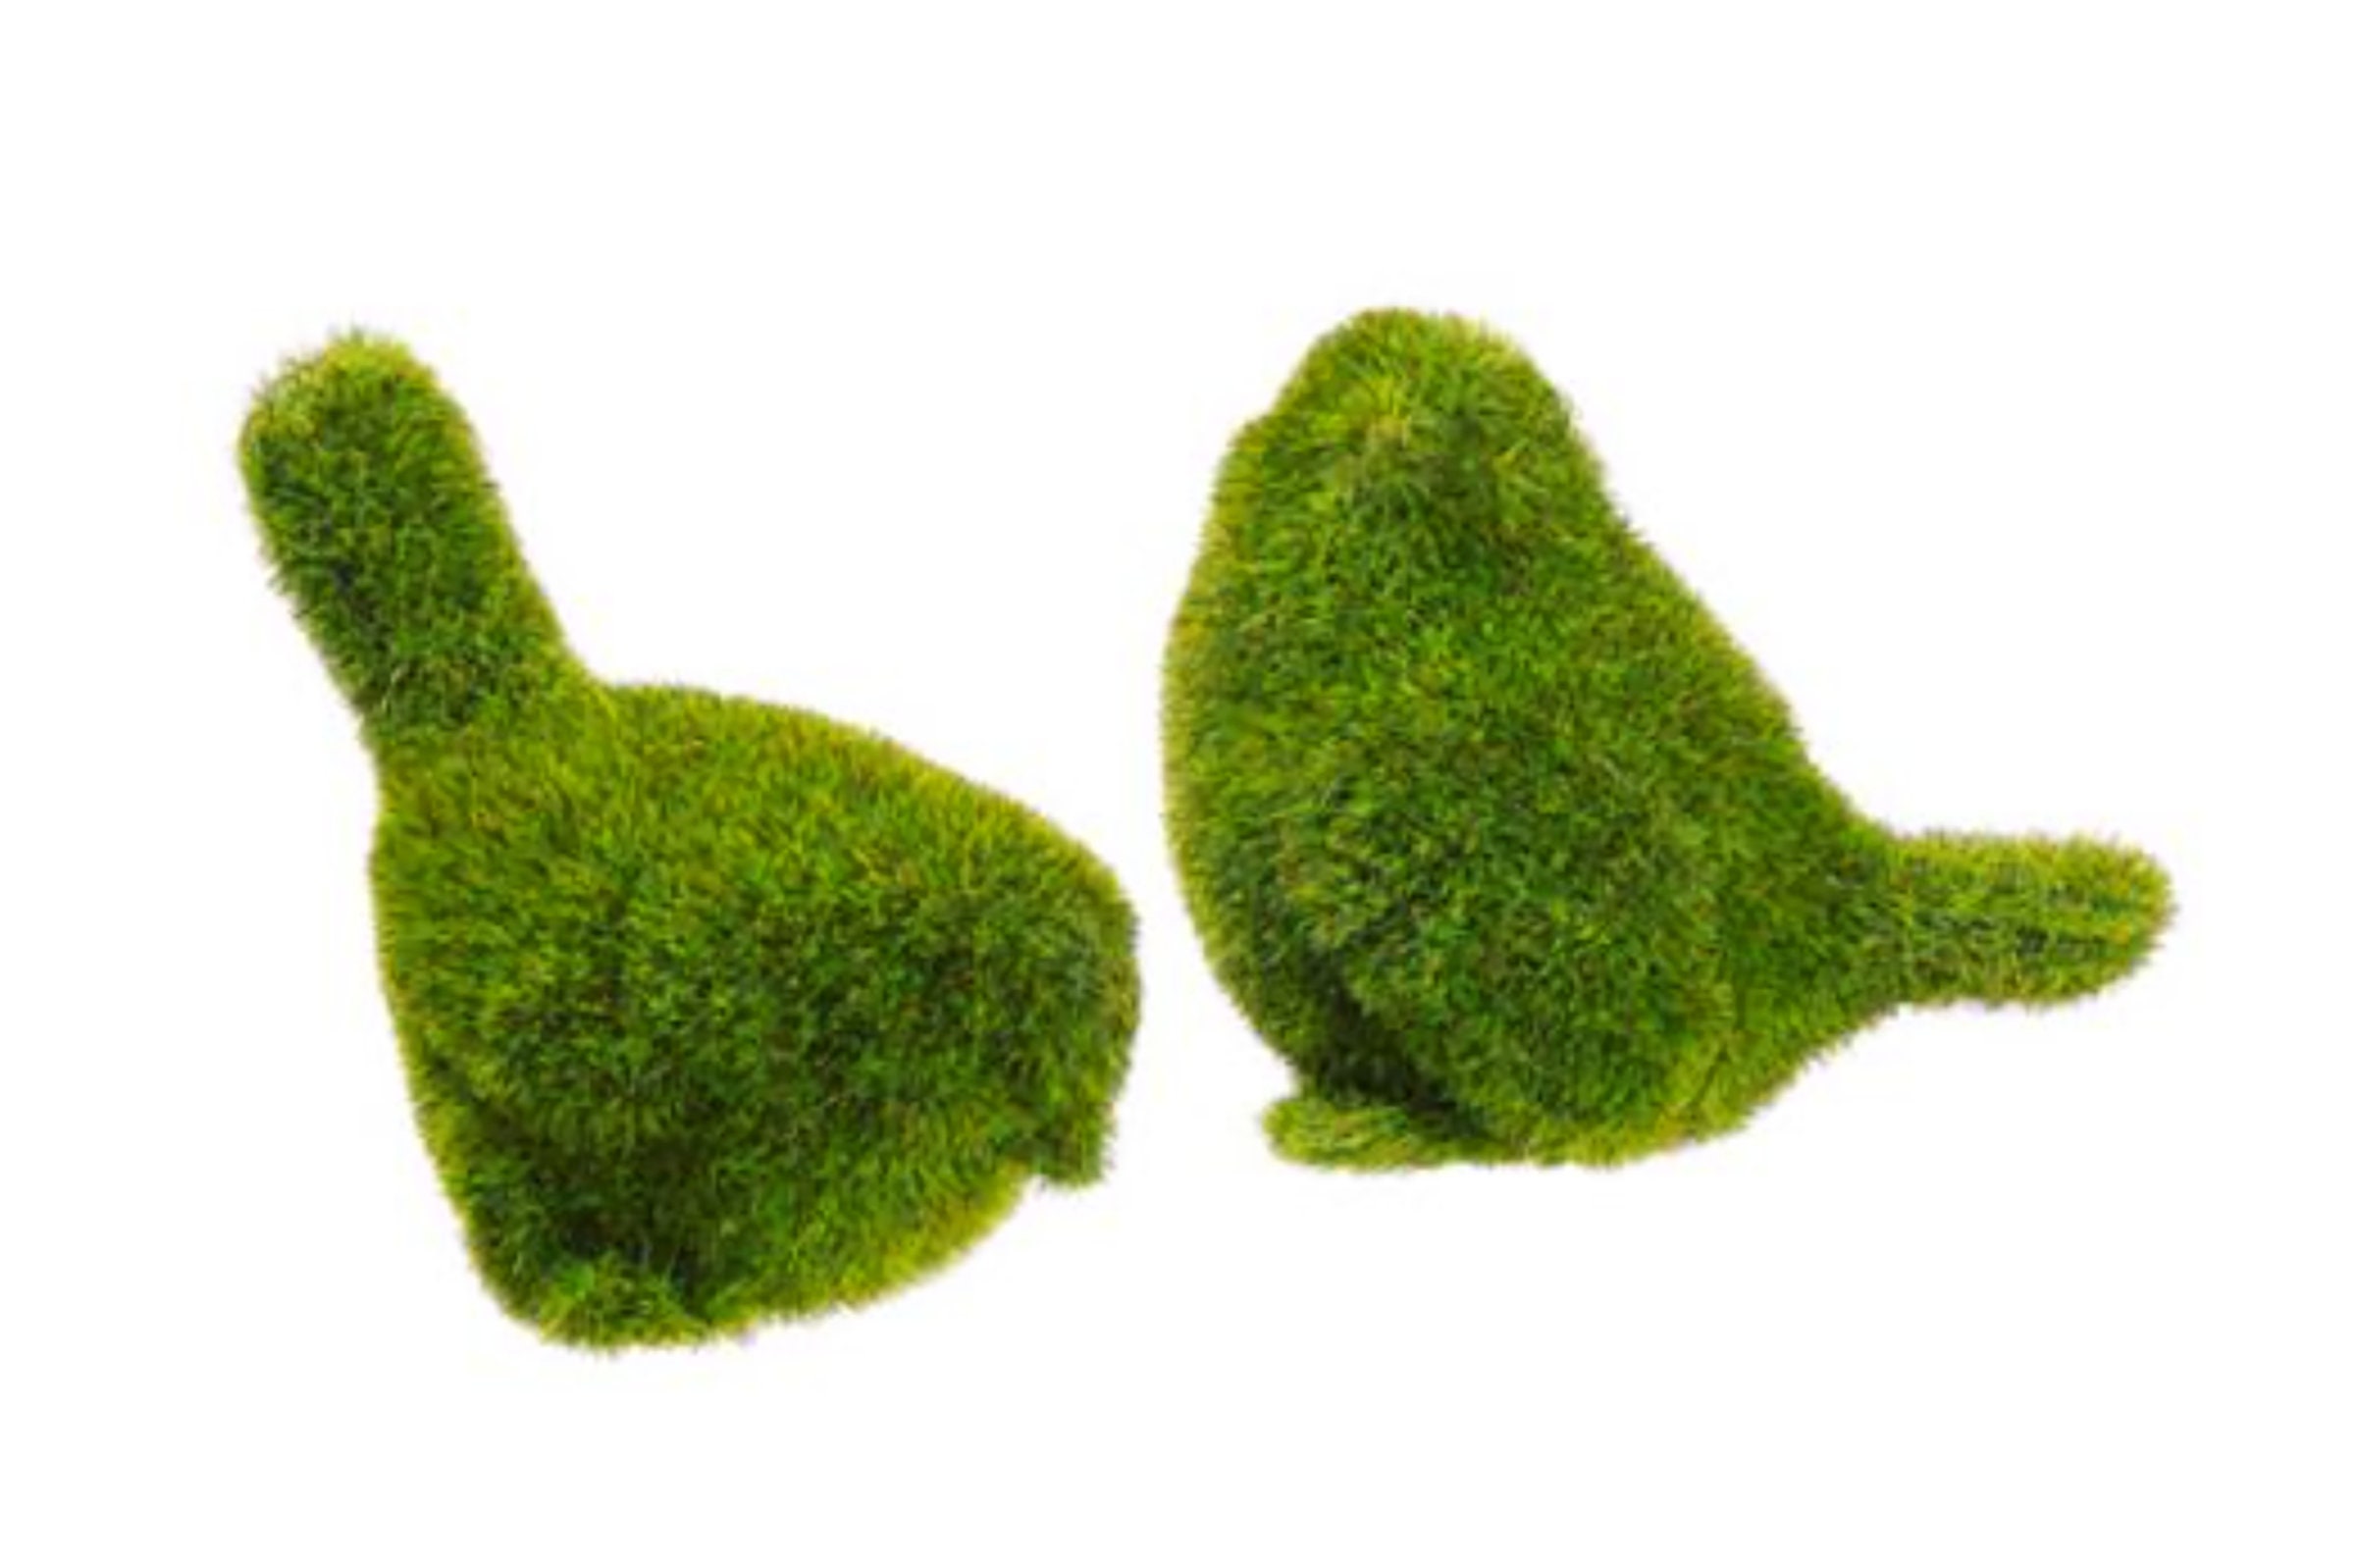 USMOLA Artificial Moss, 16OZ Fake Moss for Crafts, Decorative Moss for  Table Centerpieces Fairy Garden Wedding Party Decor, Faux Moss for Potted